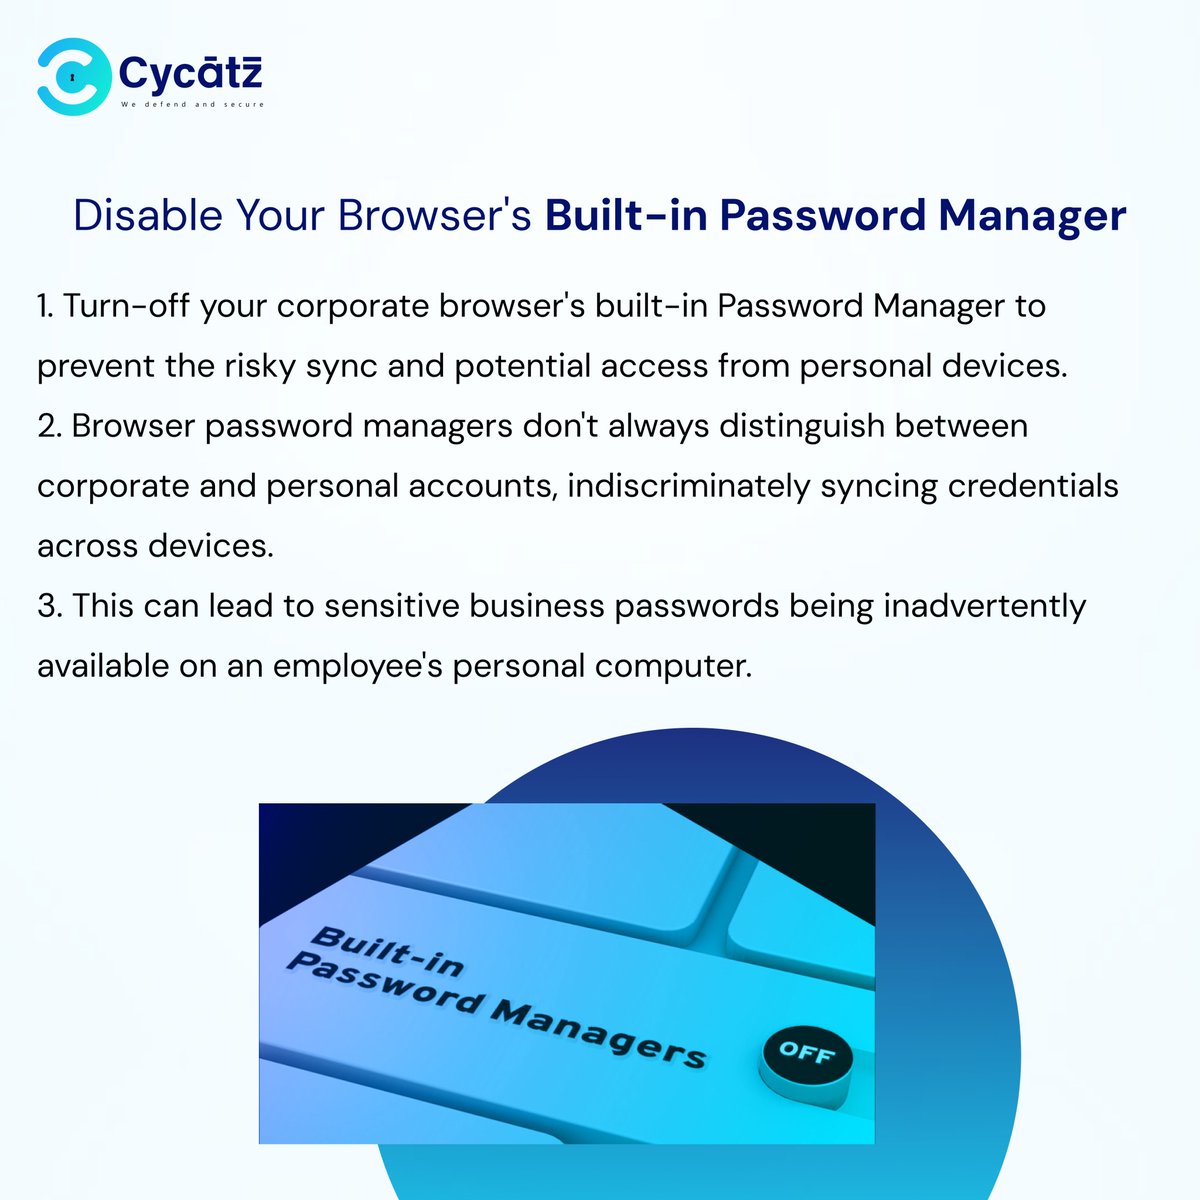 #CyCatz #Cybersecurity Disable Your Browser's Built-in Password Manager
 
#cyberawareness #cyberattack #breaches #databreaches #cybercrime #darkwebmonitoring #SurfaceWebMonitoring #mobilesecurity #emailsecurity #vendorriskmanagement #BrandMonitoring #browser #password